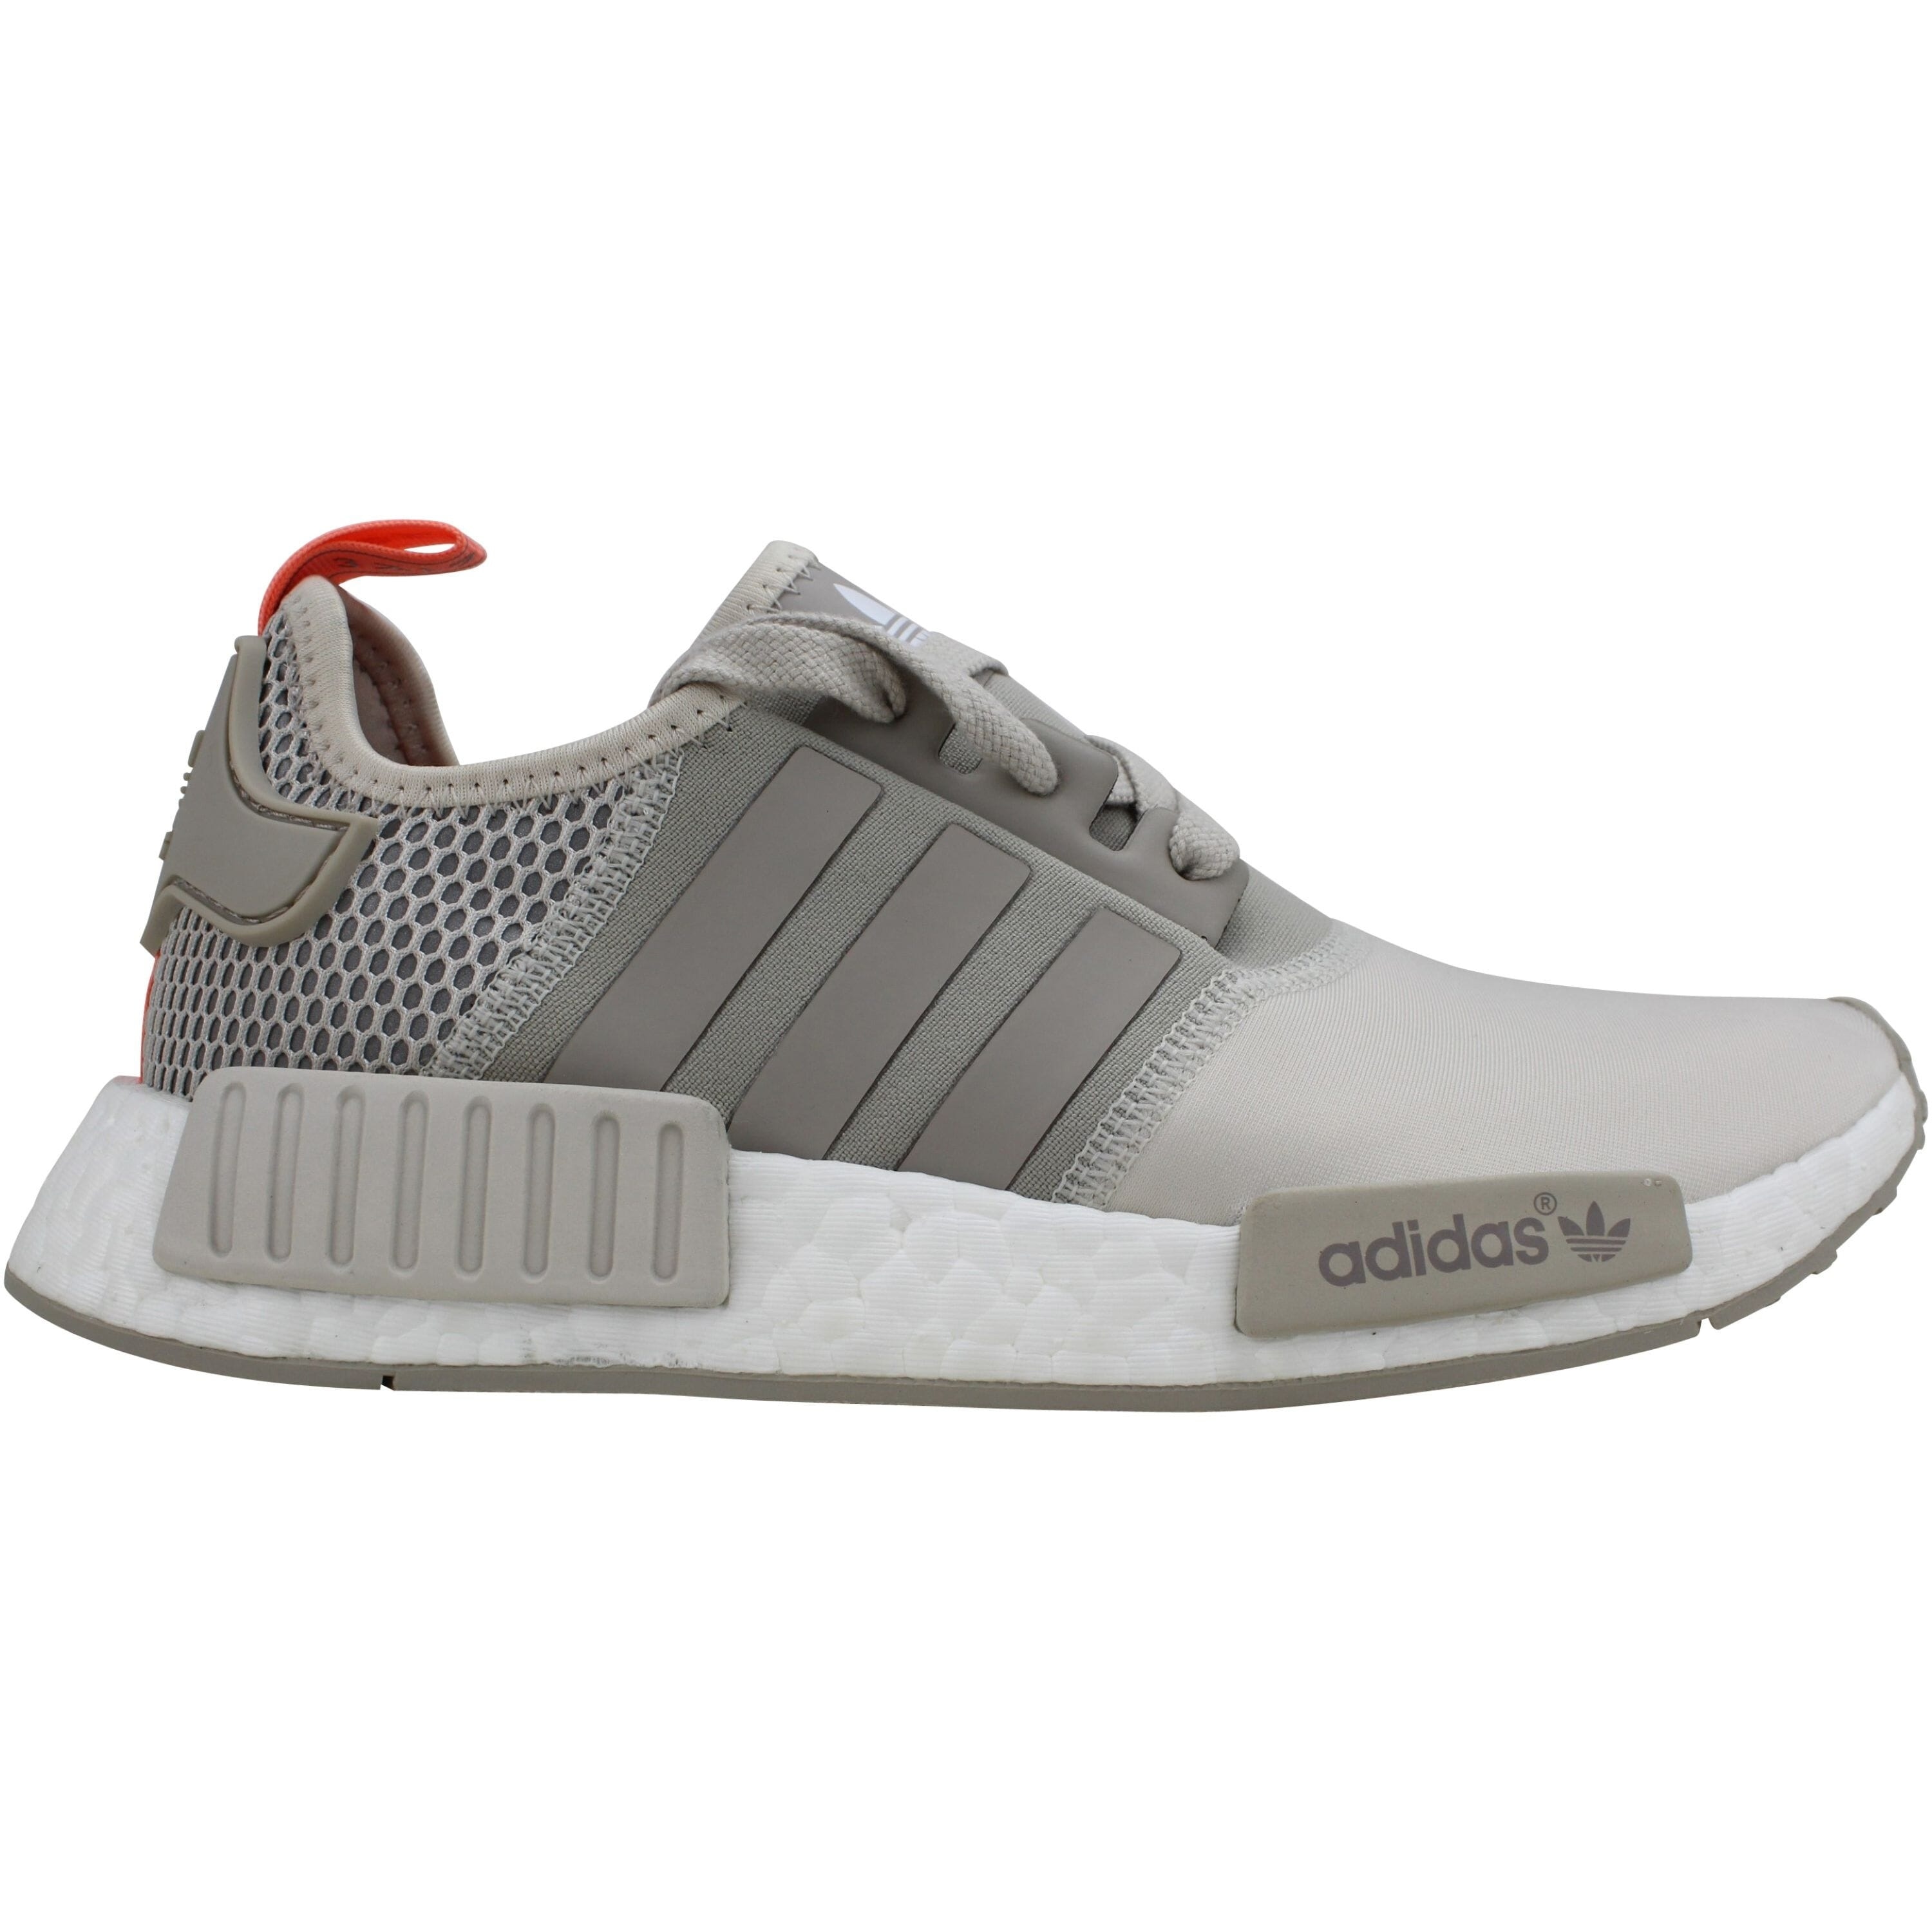 adidas nmd clear brown